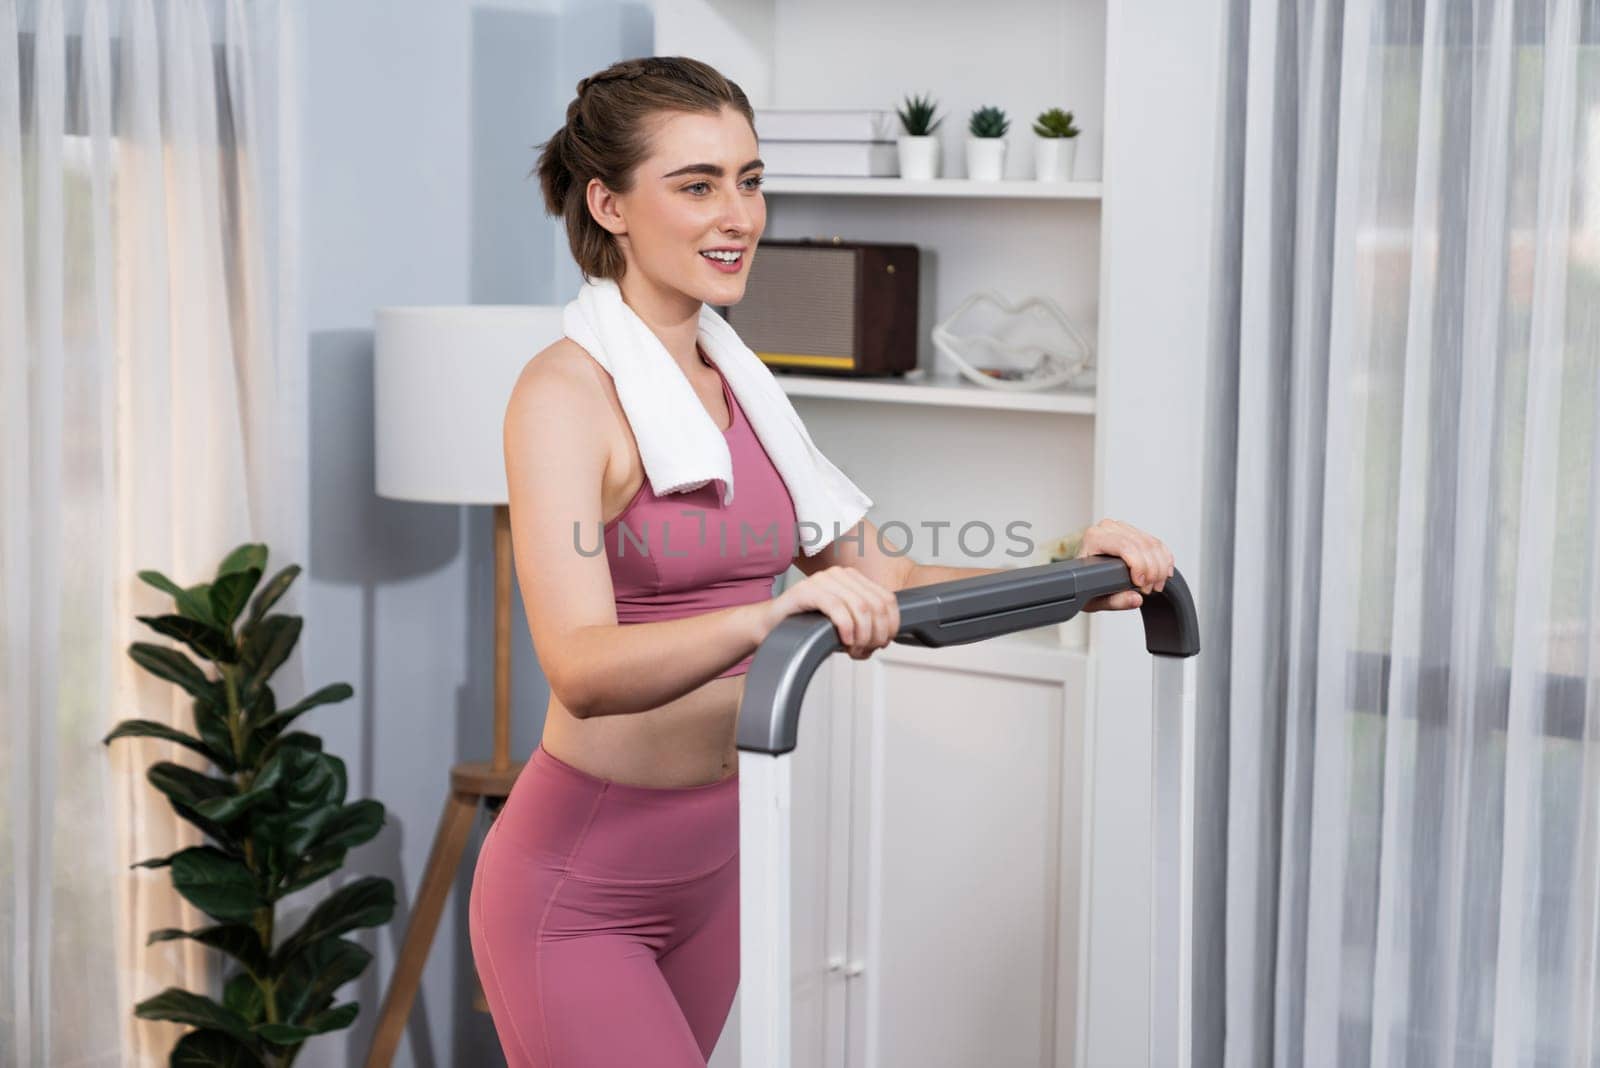 Athletic and sporty woman running on treadmill running machine during home body workout exercise session for fit physique and healthy sport lifestyle at home. Gaiety home exercise workout training.